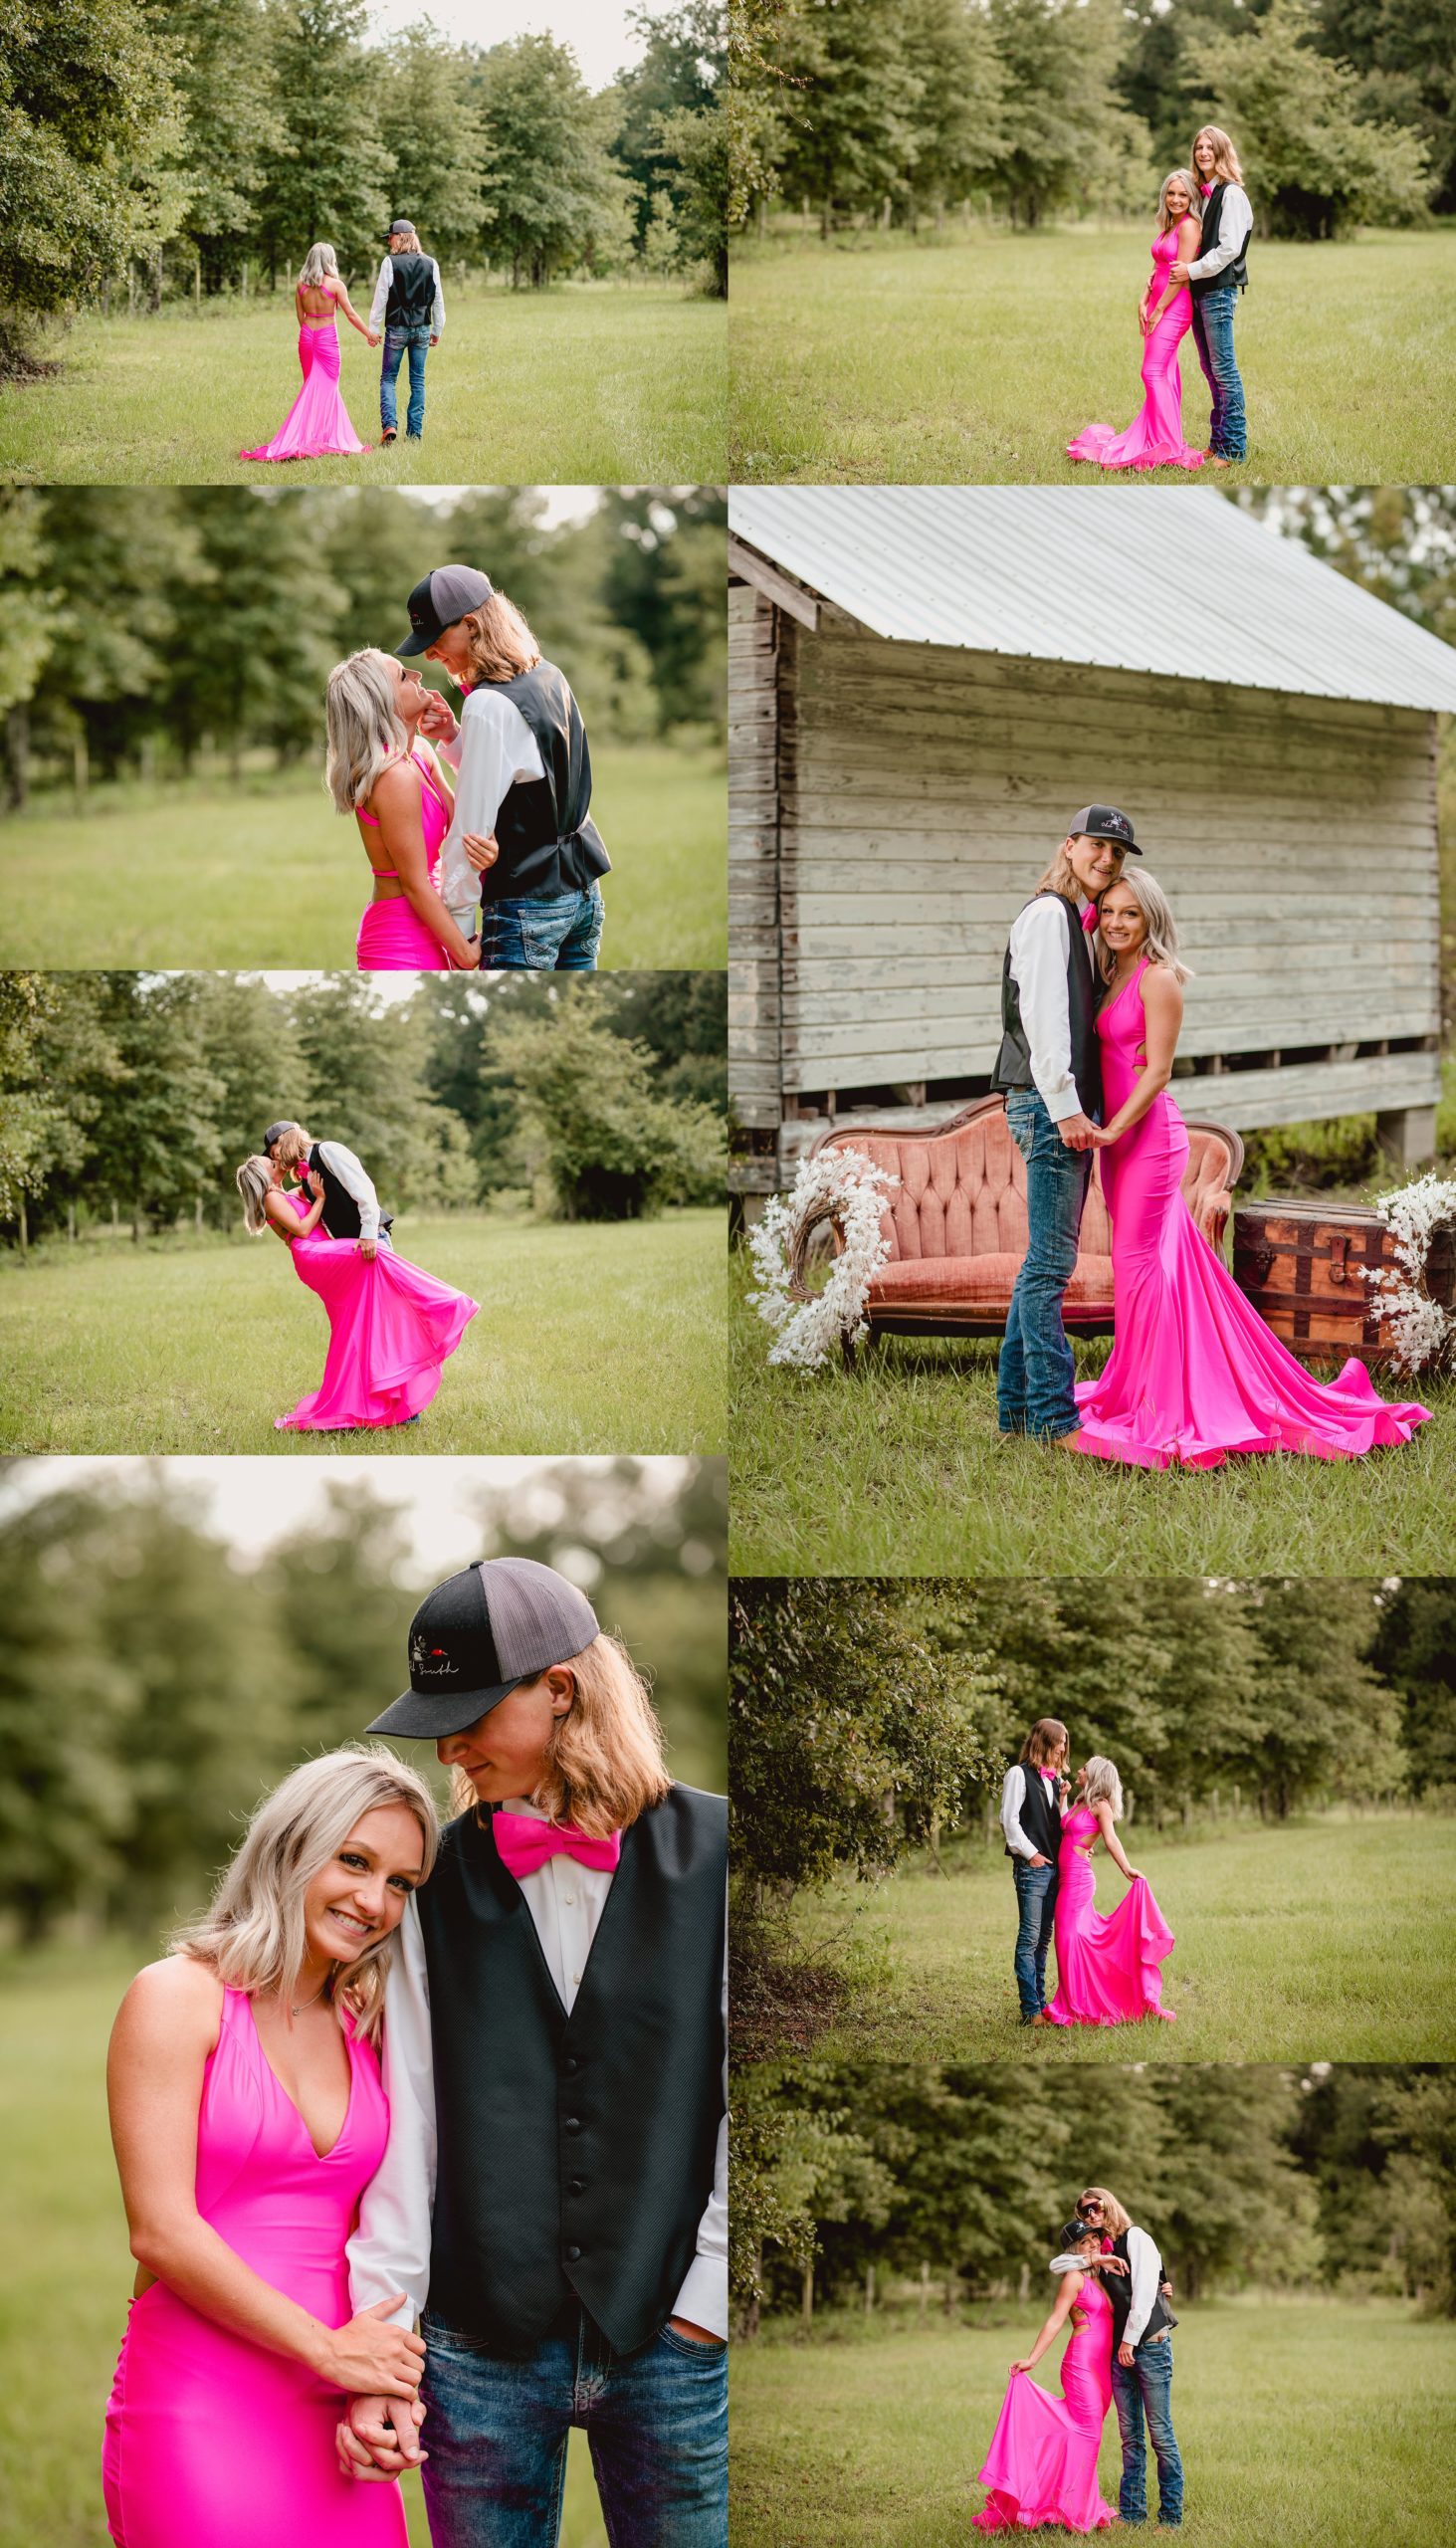 Prom photographer in North Florida in rural settings.